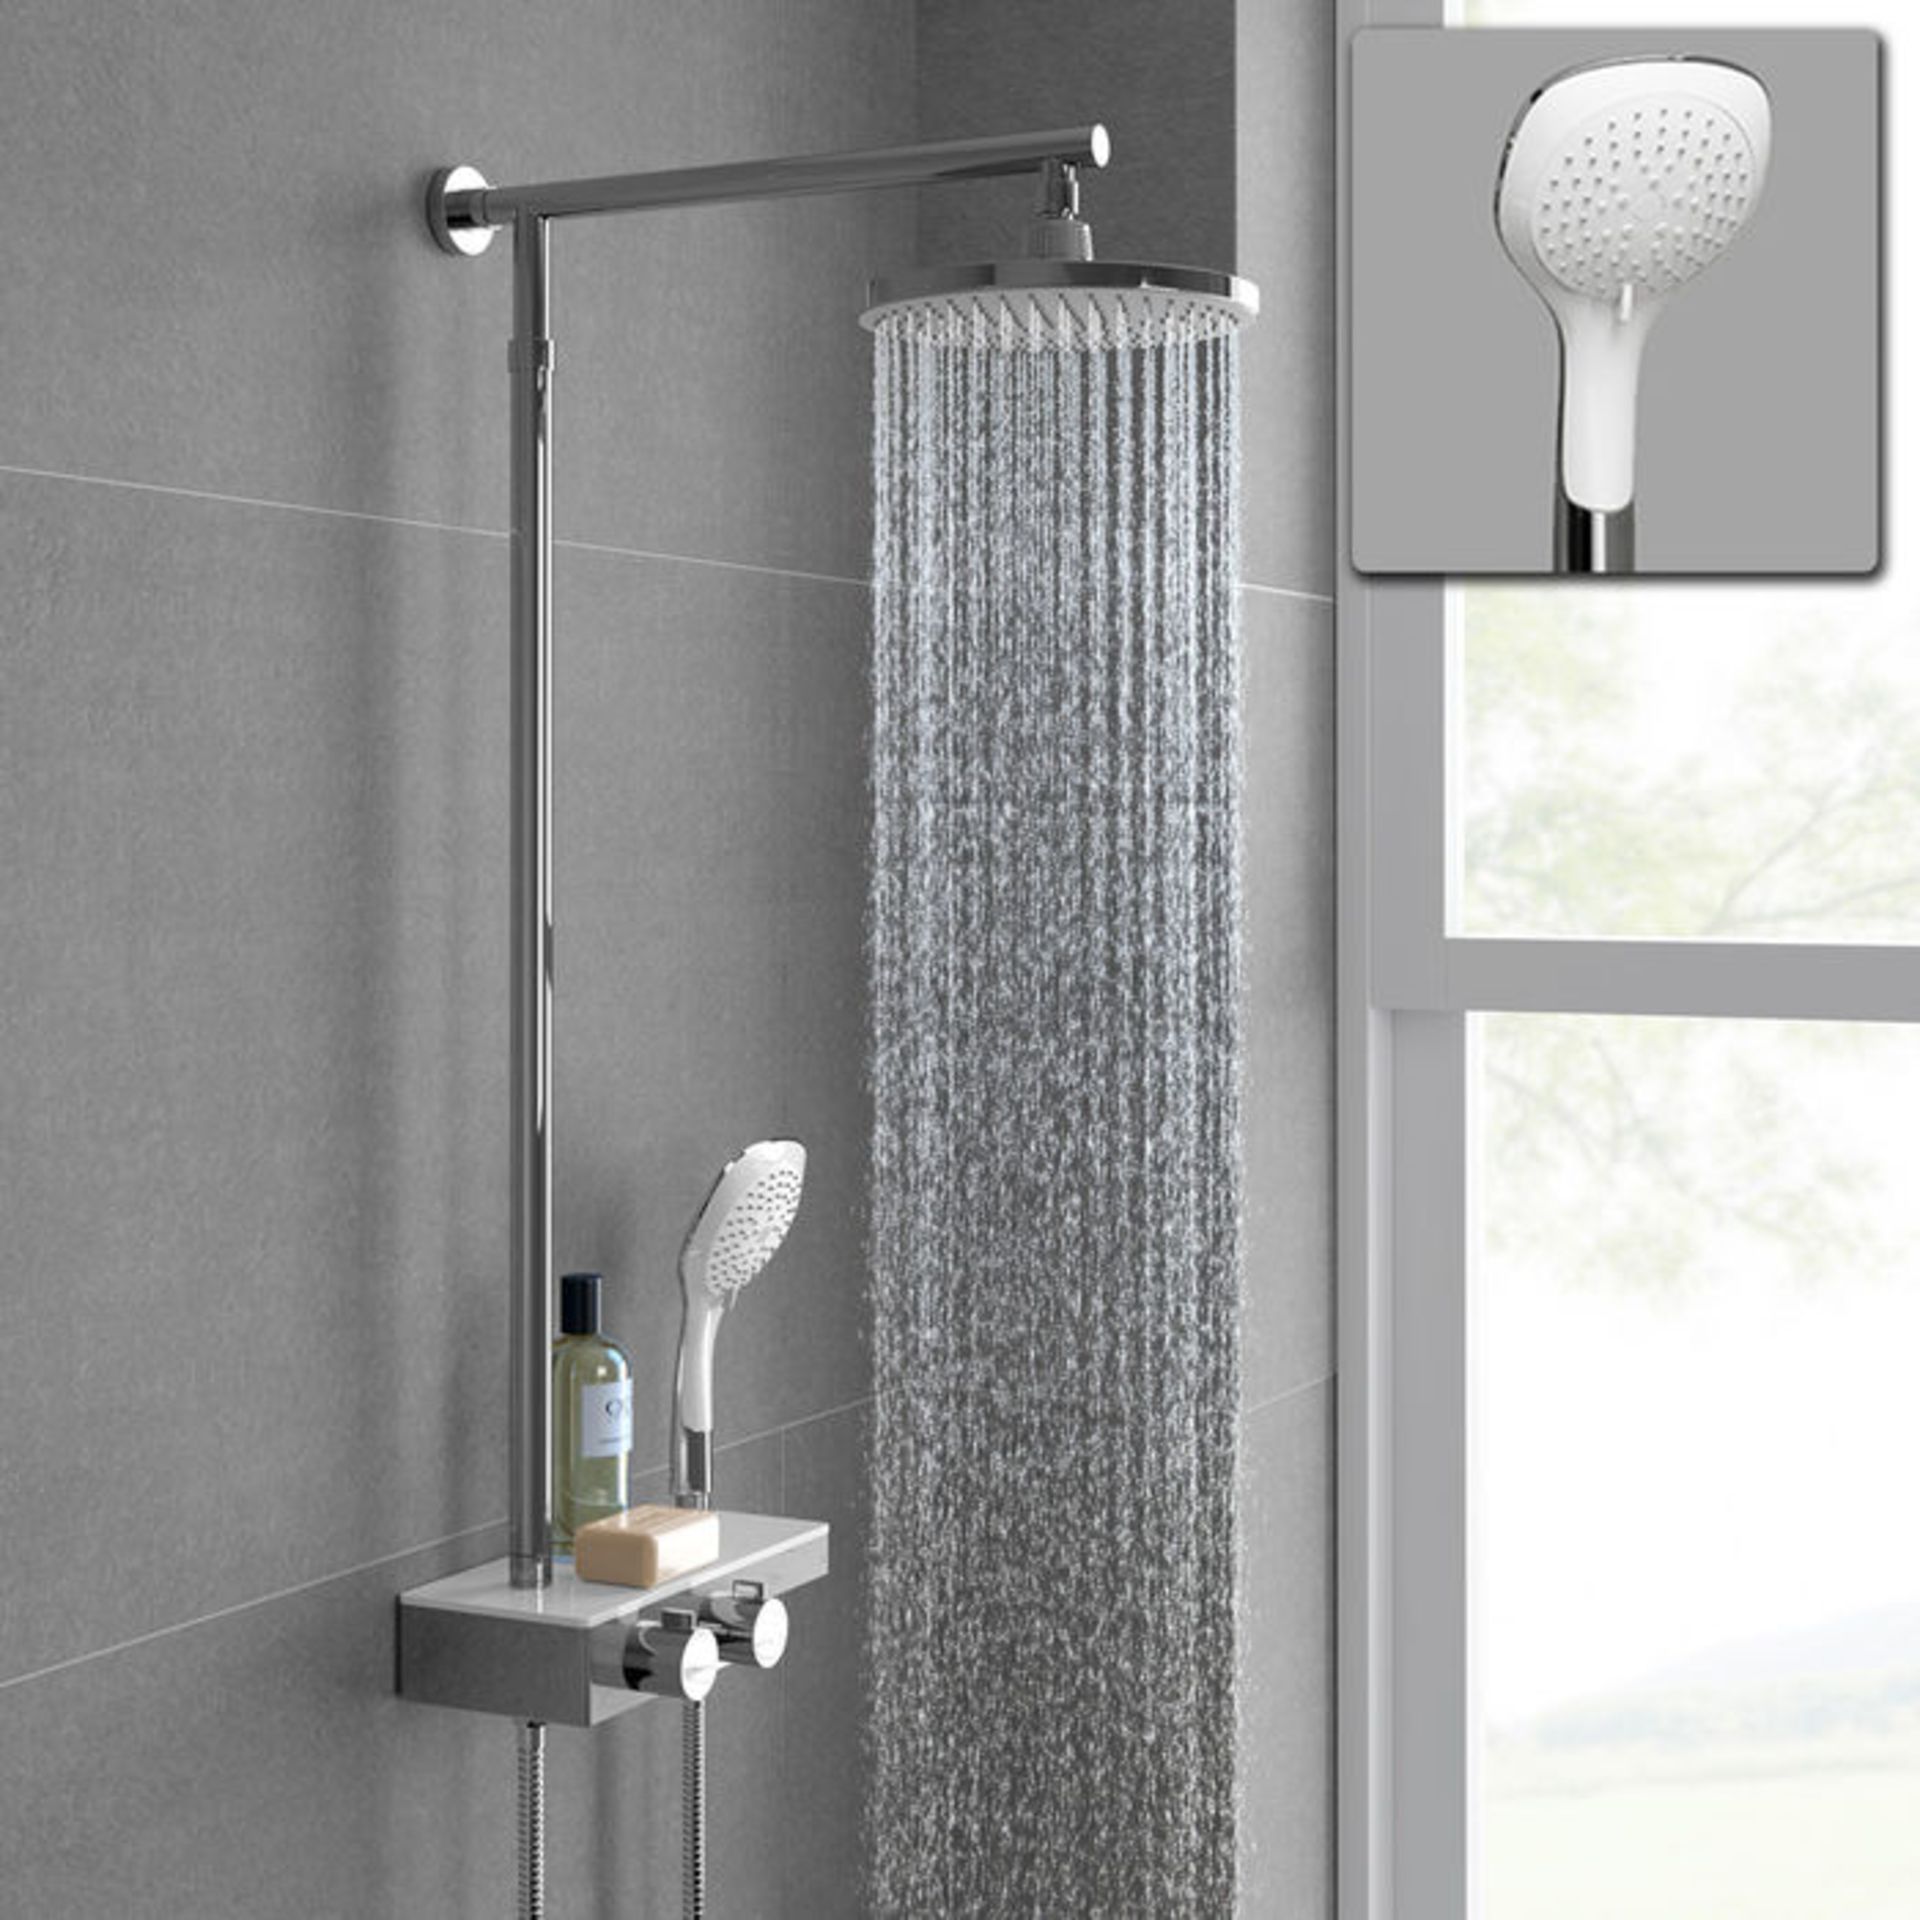 (CT196) Round Exposed Thermostatic Mixer Shower Kit Medium Head & Shelf. Cool to touch shower for - Bild 4 aus 4